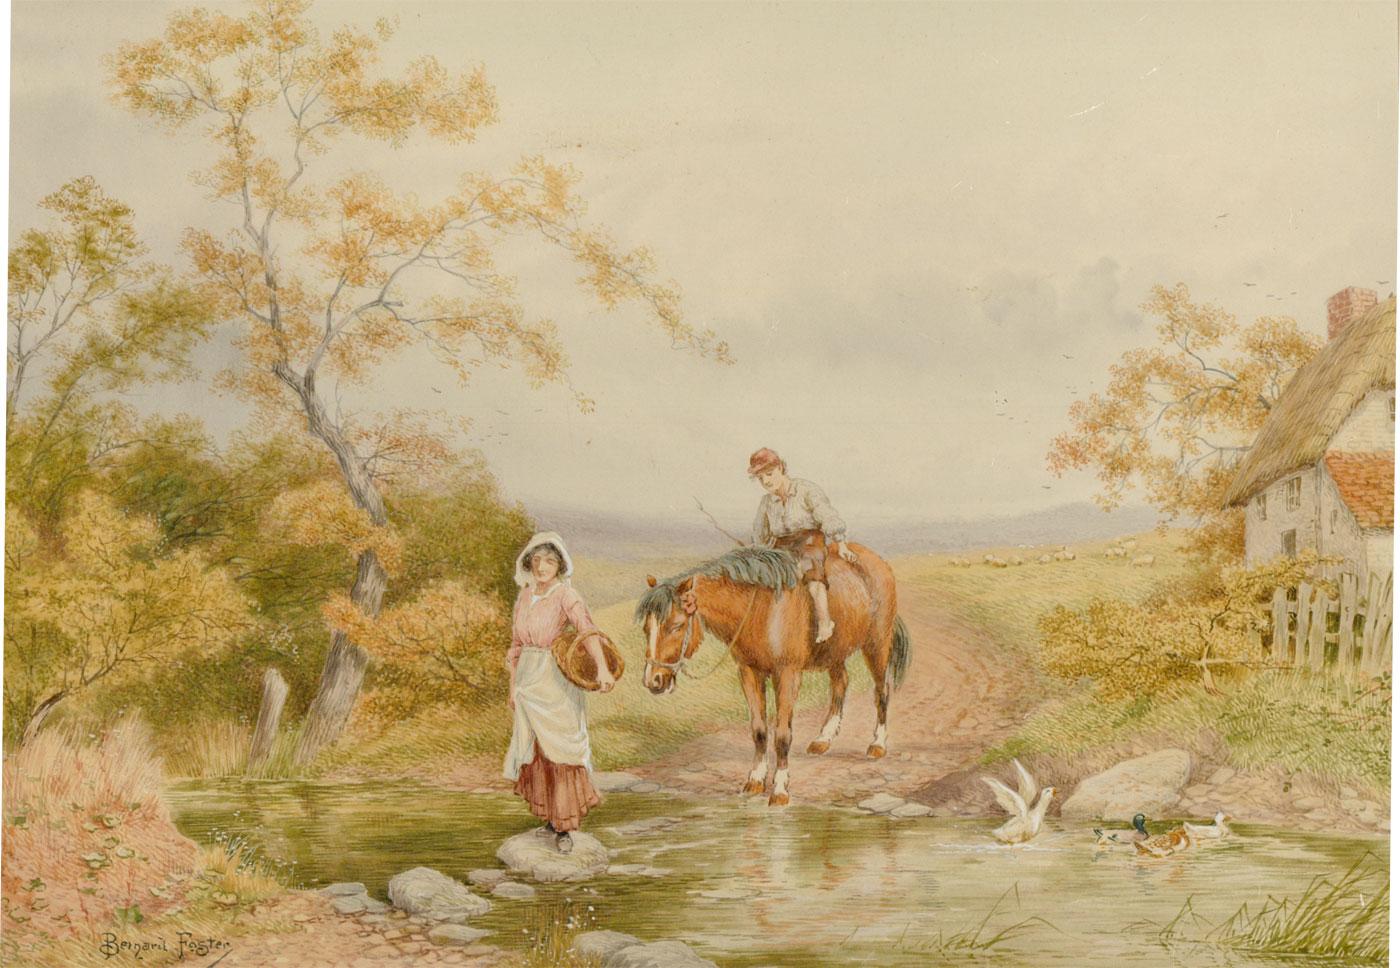 Bernard Foster - Signed 19th Century Watercolour, Travellers in a Landscape For Sale 1